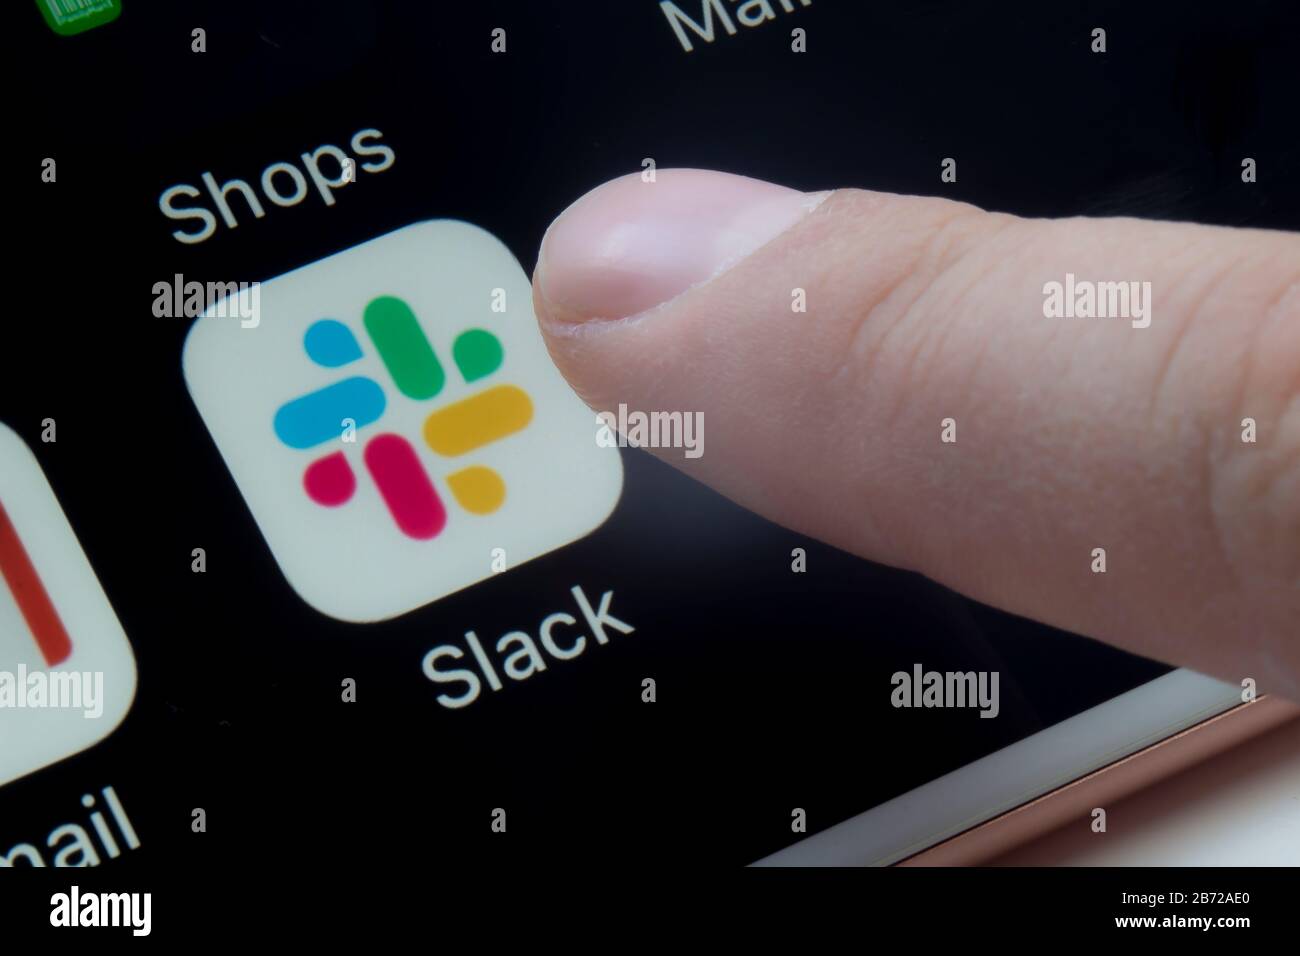 Calgary, Alberta, Canada. March 12, 2020.A person about to use Slack app which is a proprietary instant messaging platform Stock Photo